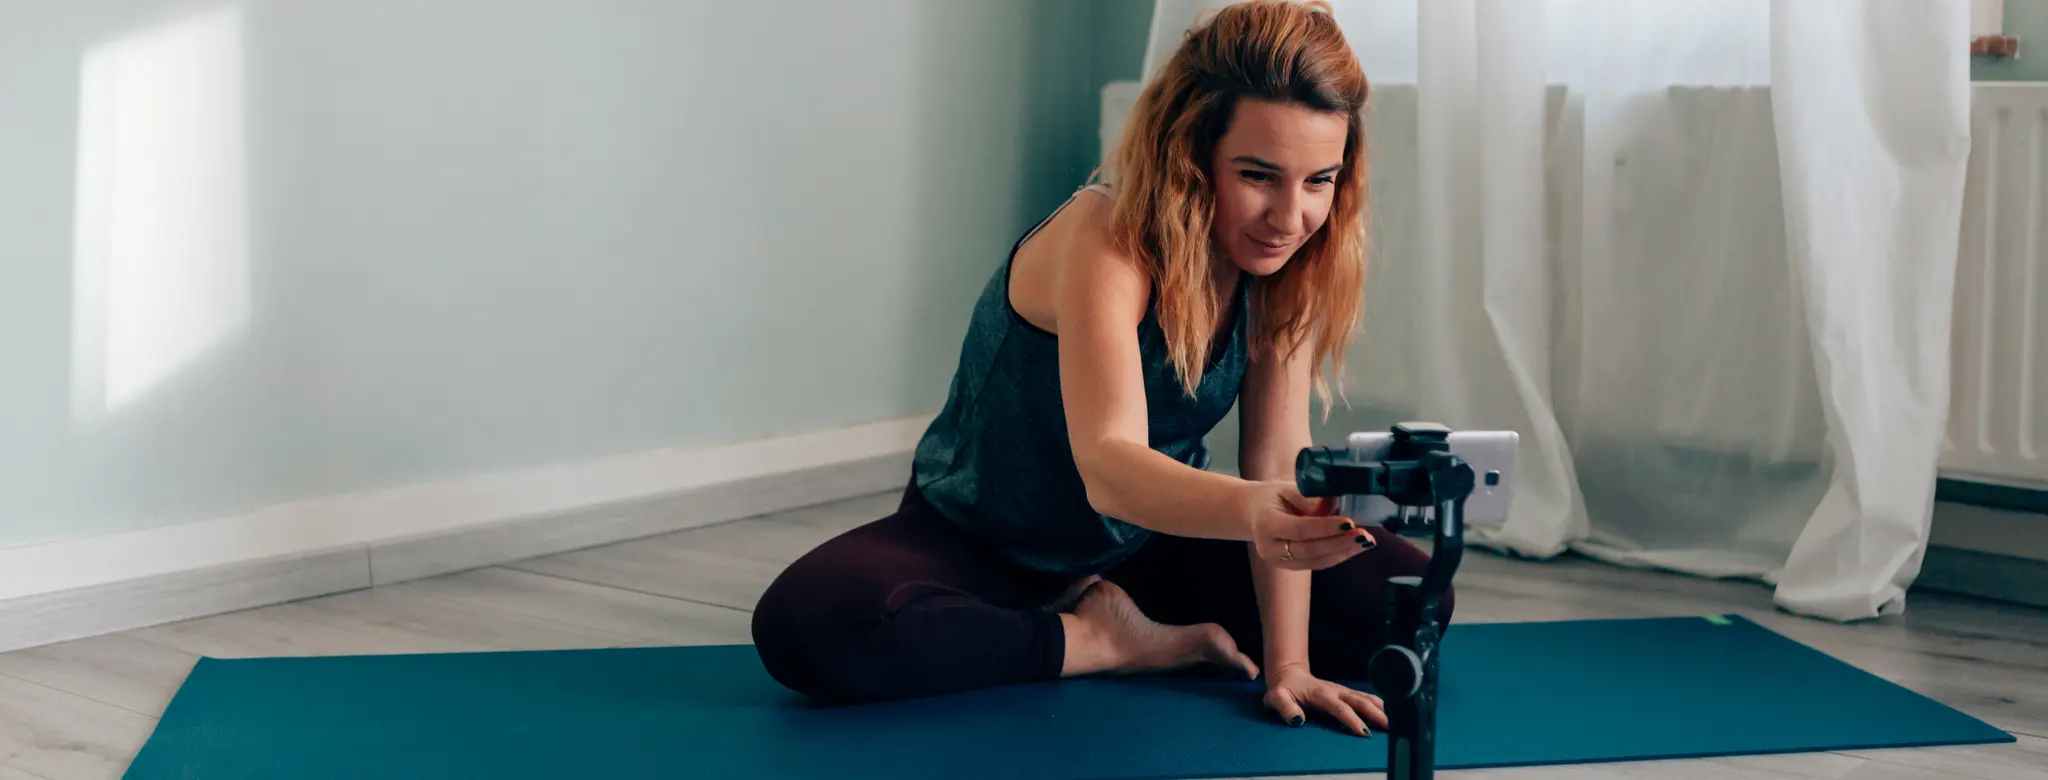 Fitness instructor at home on a mat and setting up virtual class with a phone on a tripod